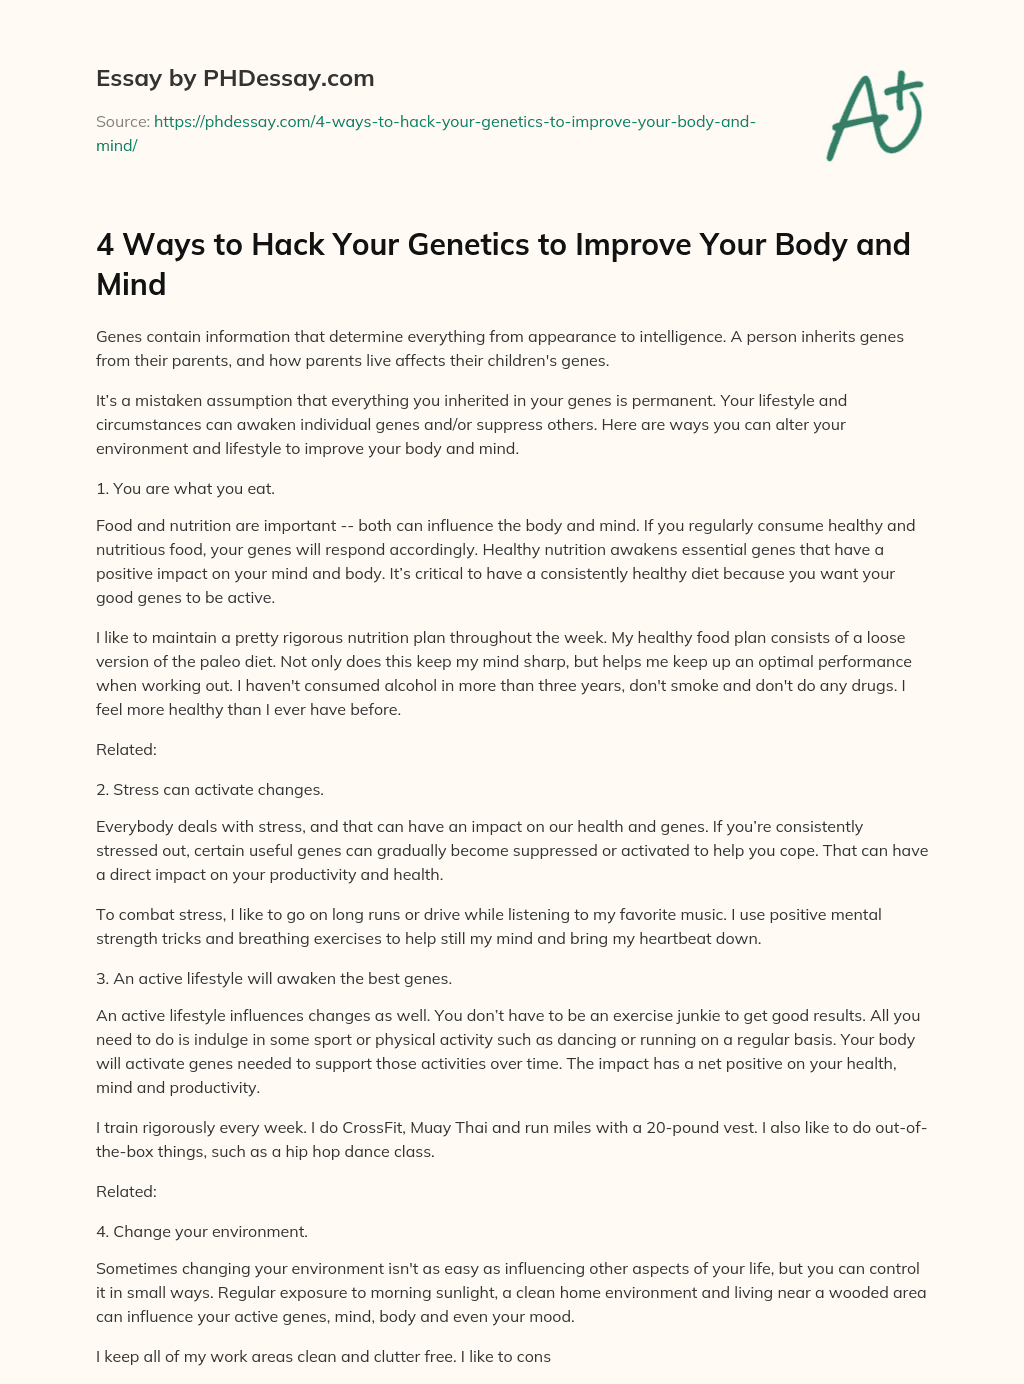 4 Ways to Hack Your Genetics to Improve Your Body and Mind essay